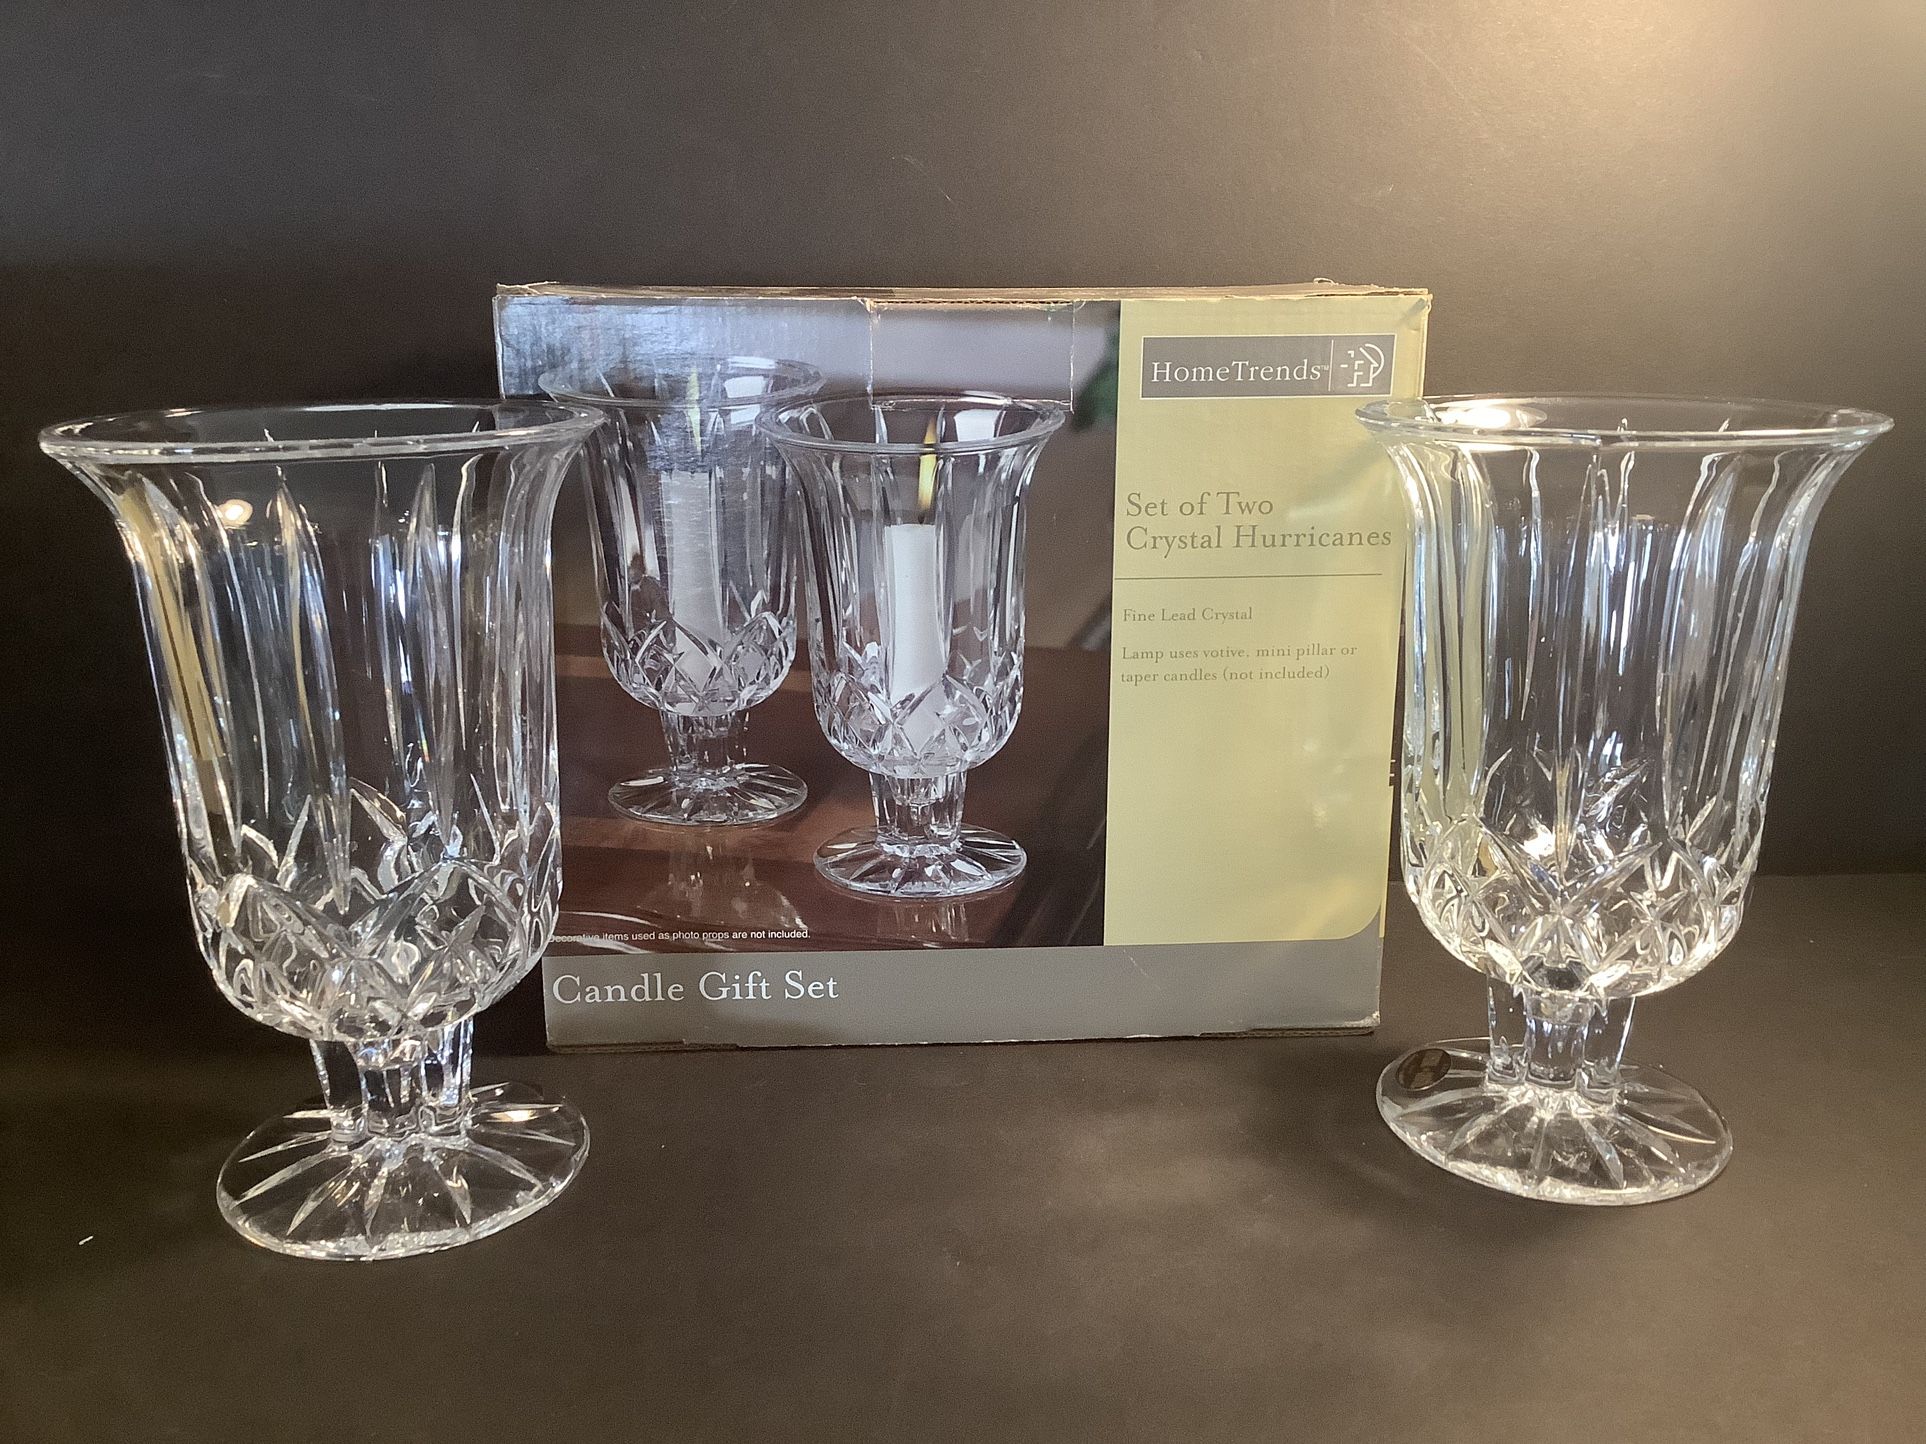 SET OF 2 BRAND NEW CRYSTAL HURRICANES CANDLE GIFT SET MADE IN THE U.S.A.